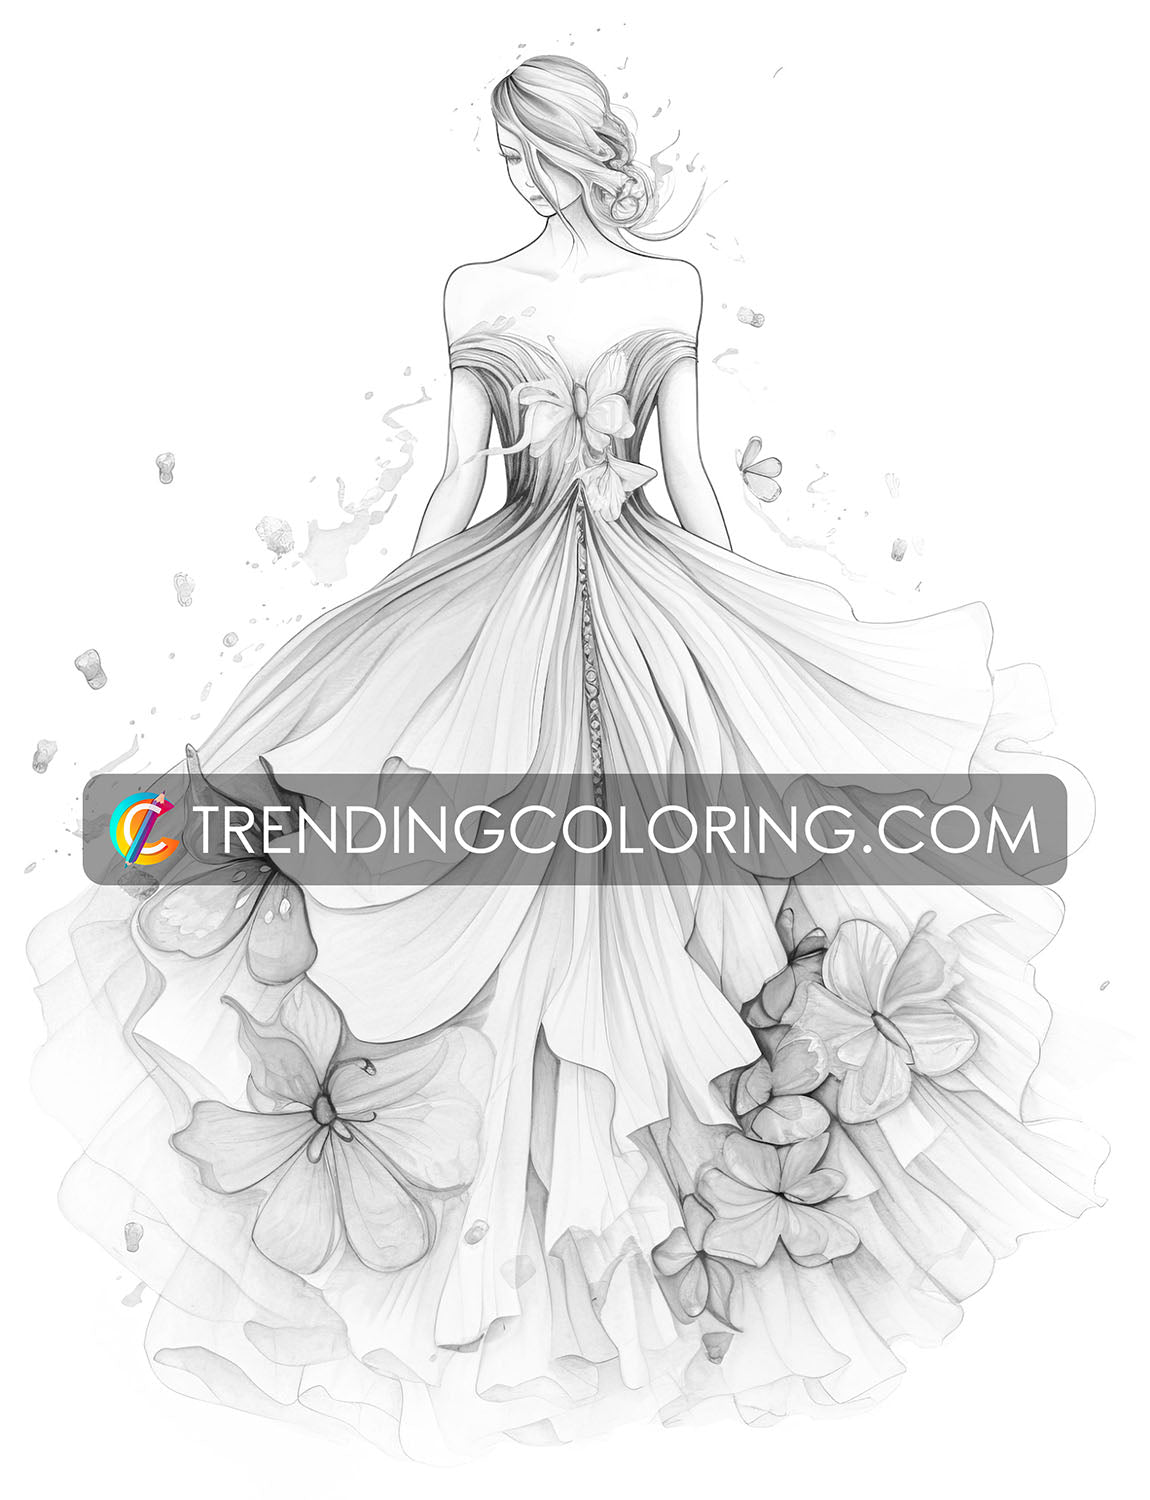 25 Floral Dress Grayscale Coloring Pages  - Instant Download - Printable PDF Dark/Light